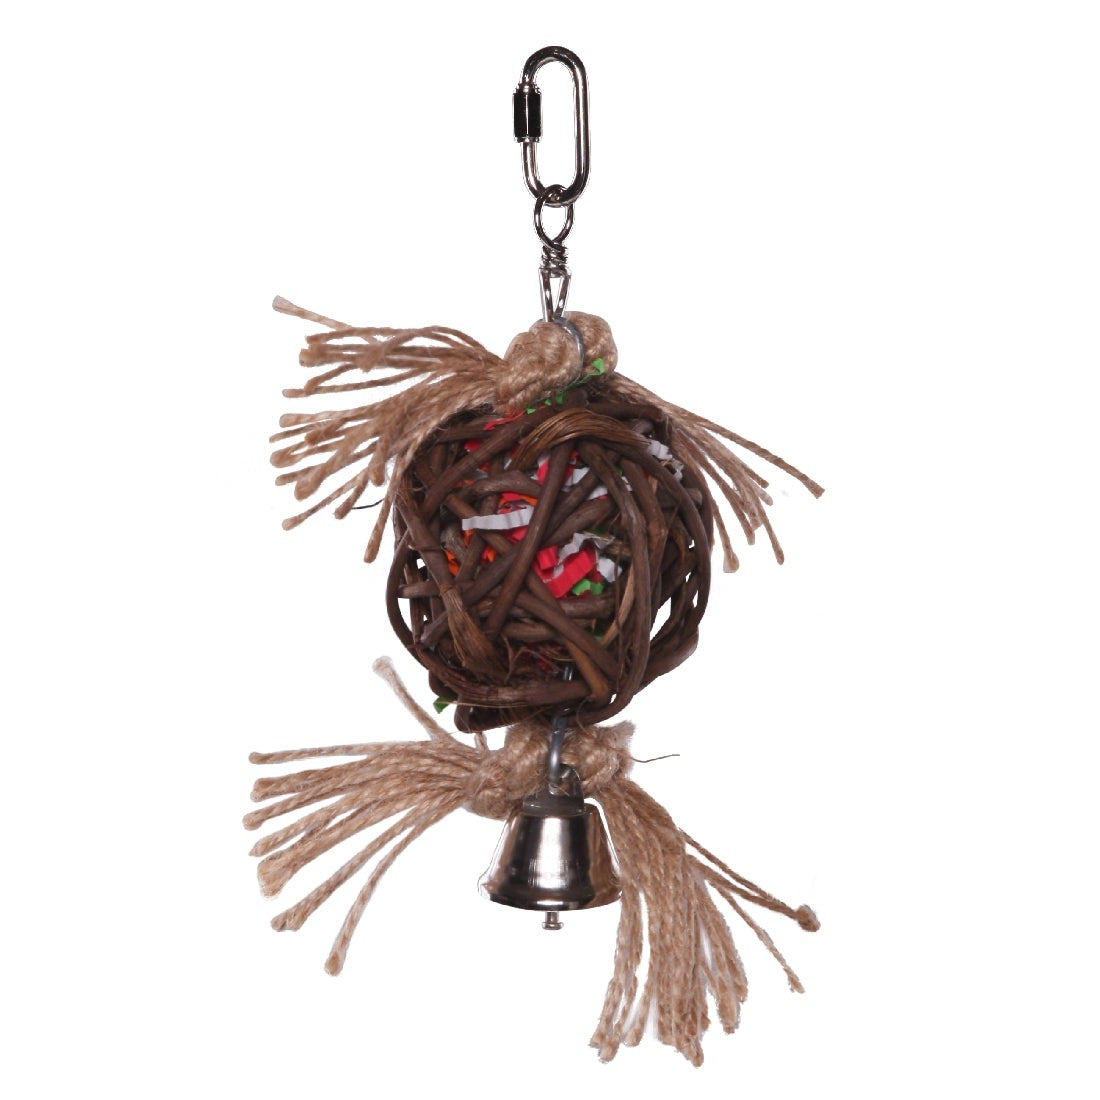 Woven vine ball bird toy with hanging bell and tassels.